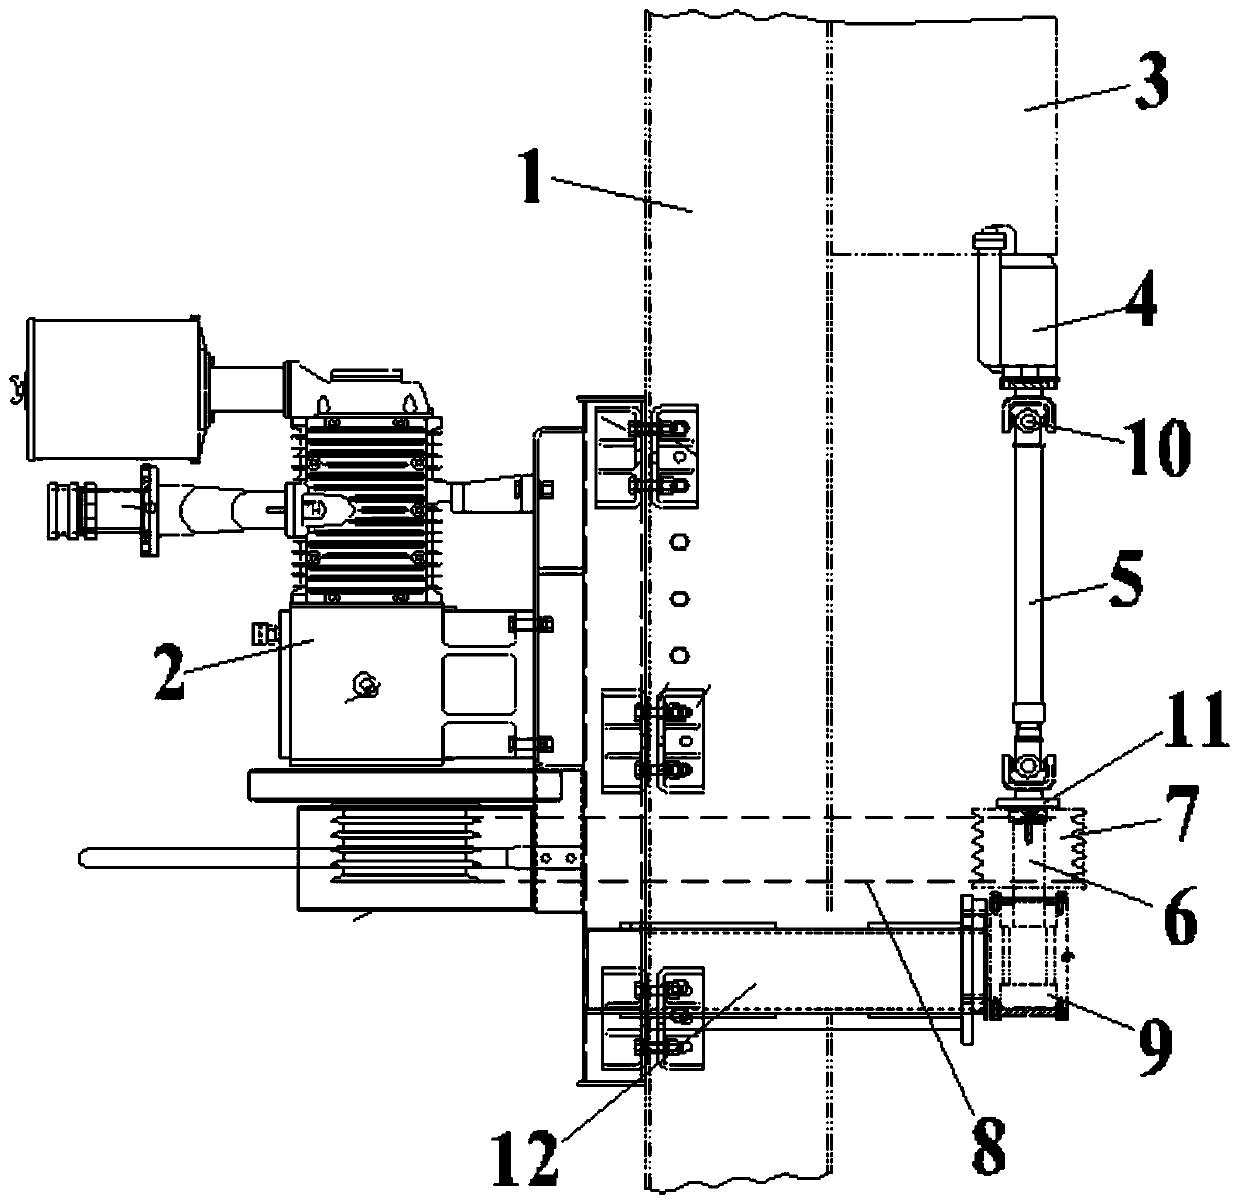 Power-taking power system mounting structure in tractor